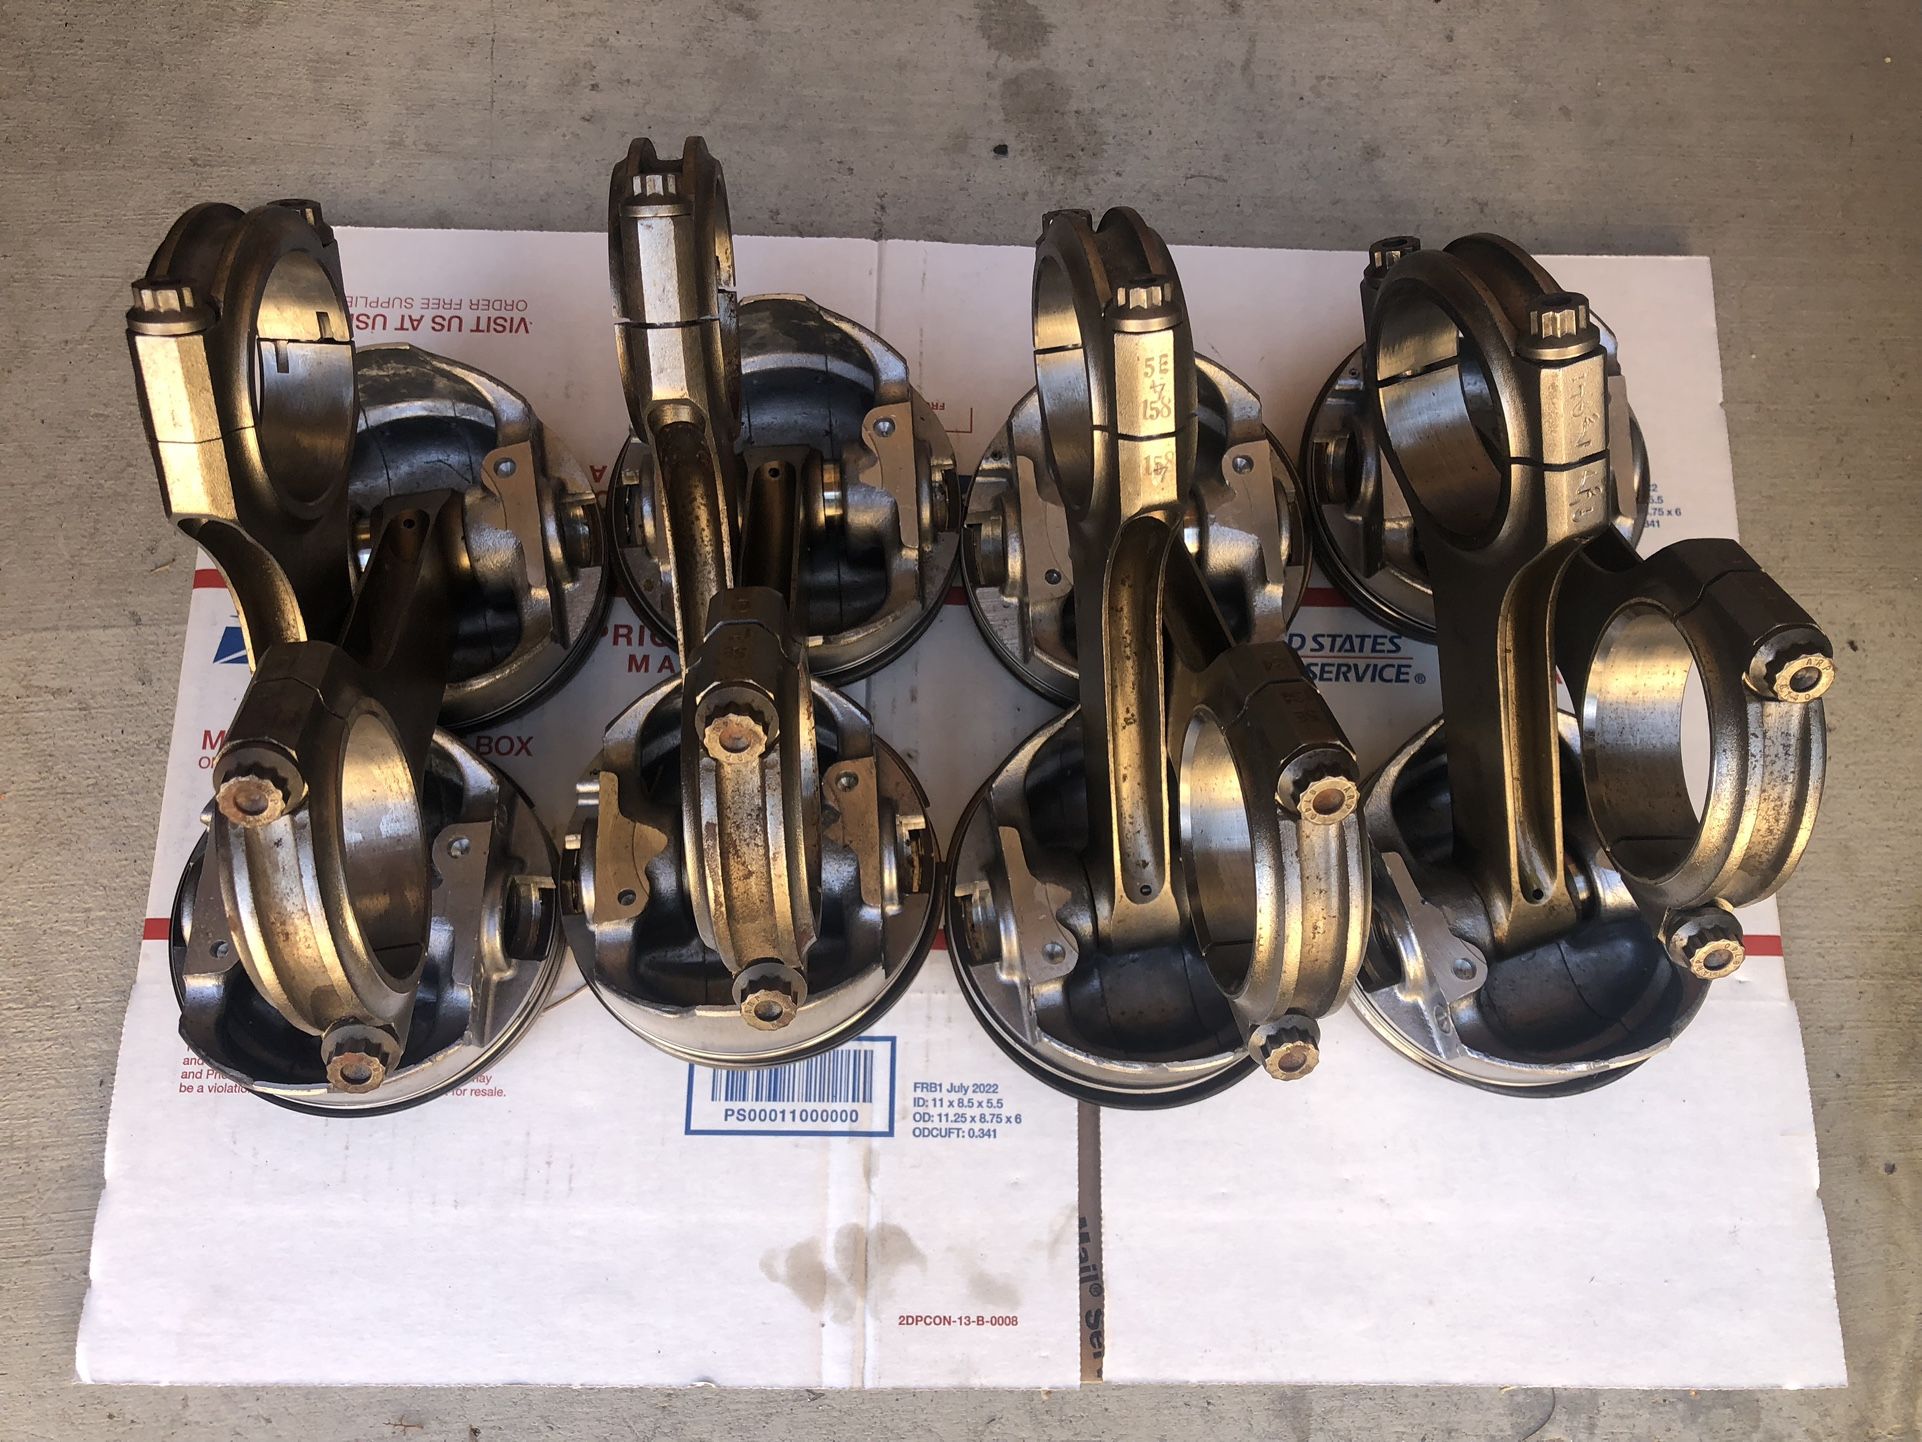 ***** KEITH BLACK SBC 400 PISTONS AND 6” H BEAM CONNECTING RODS *****